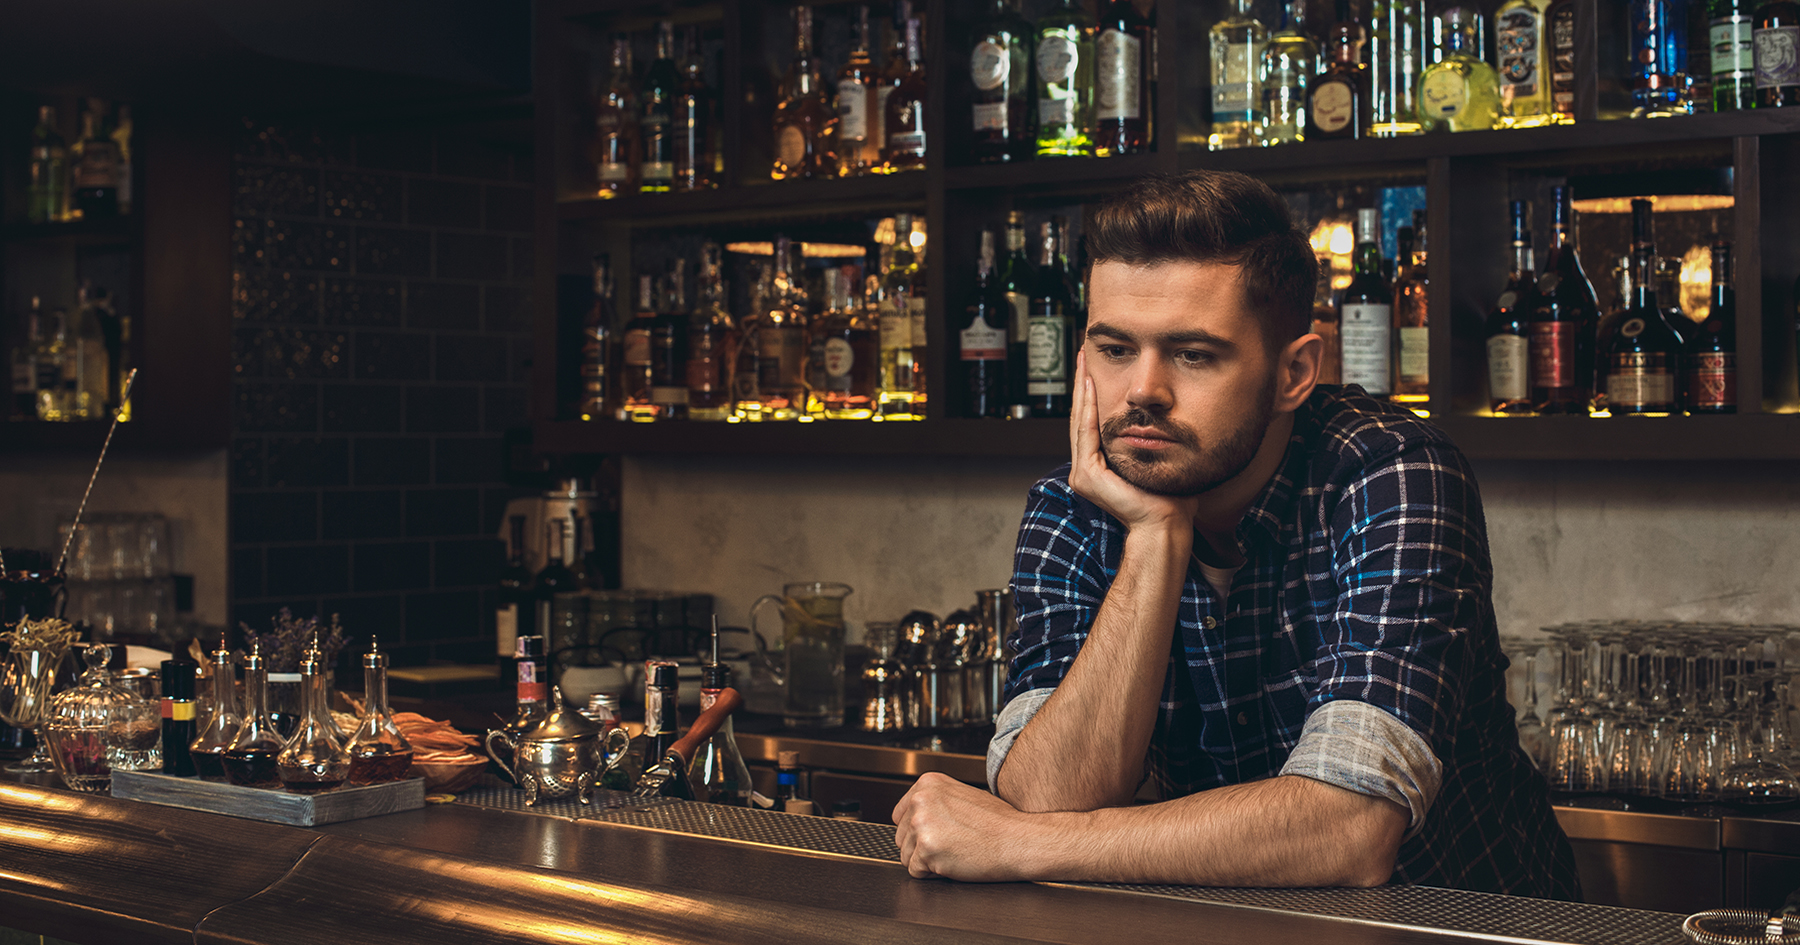 Bar Owner Realizes He Could Have Advertised Cover Band’s Show, Too